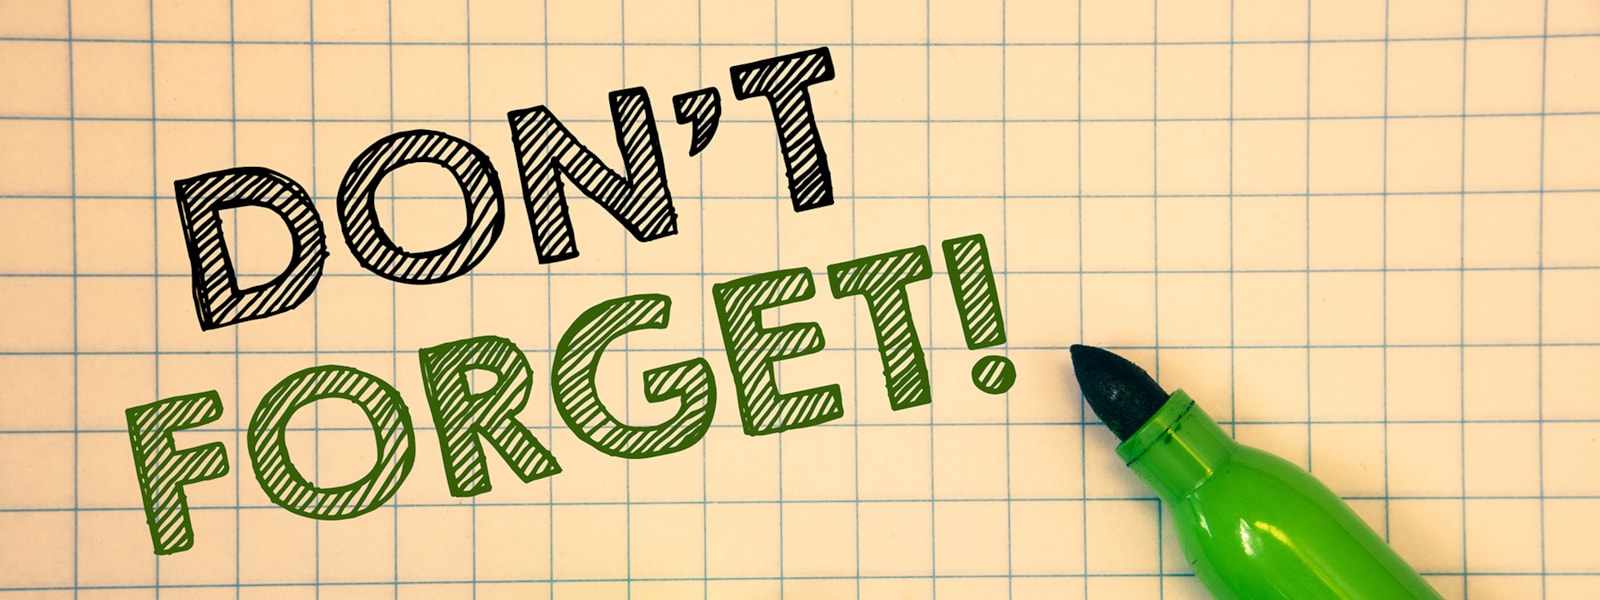 Large Words that say " don't forget" in black and green, in front of Grid paper and a green marker.   